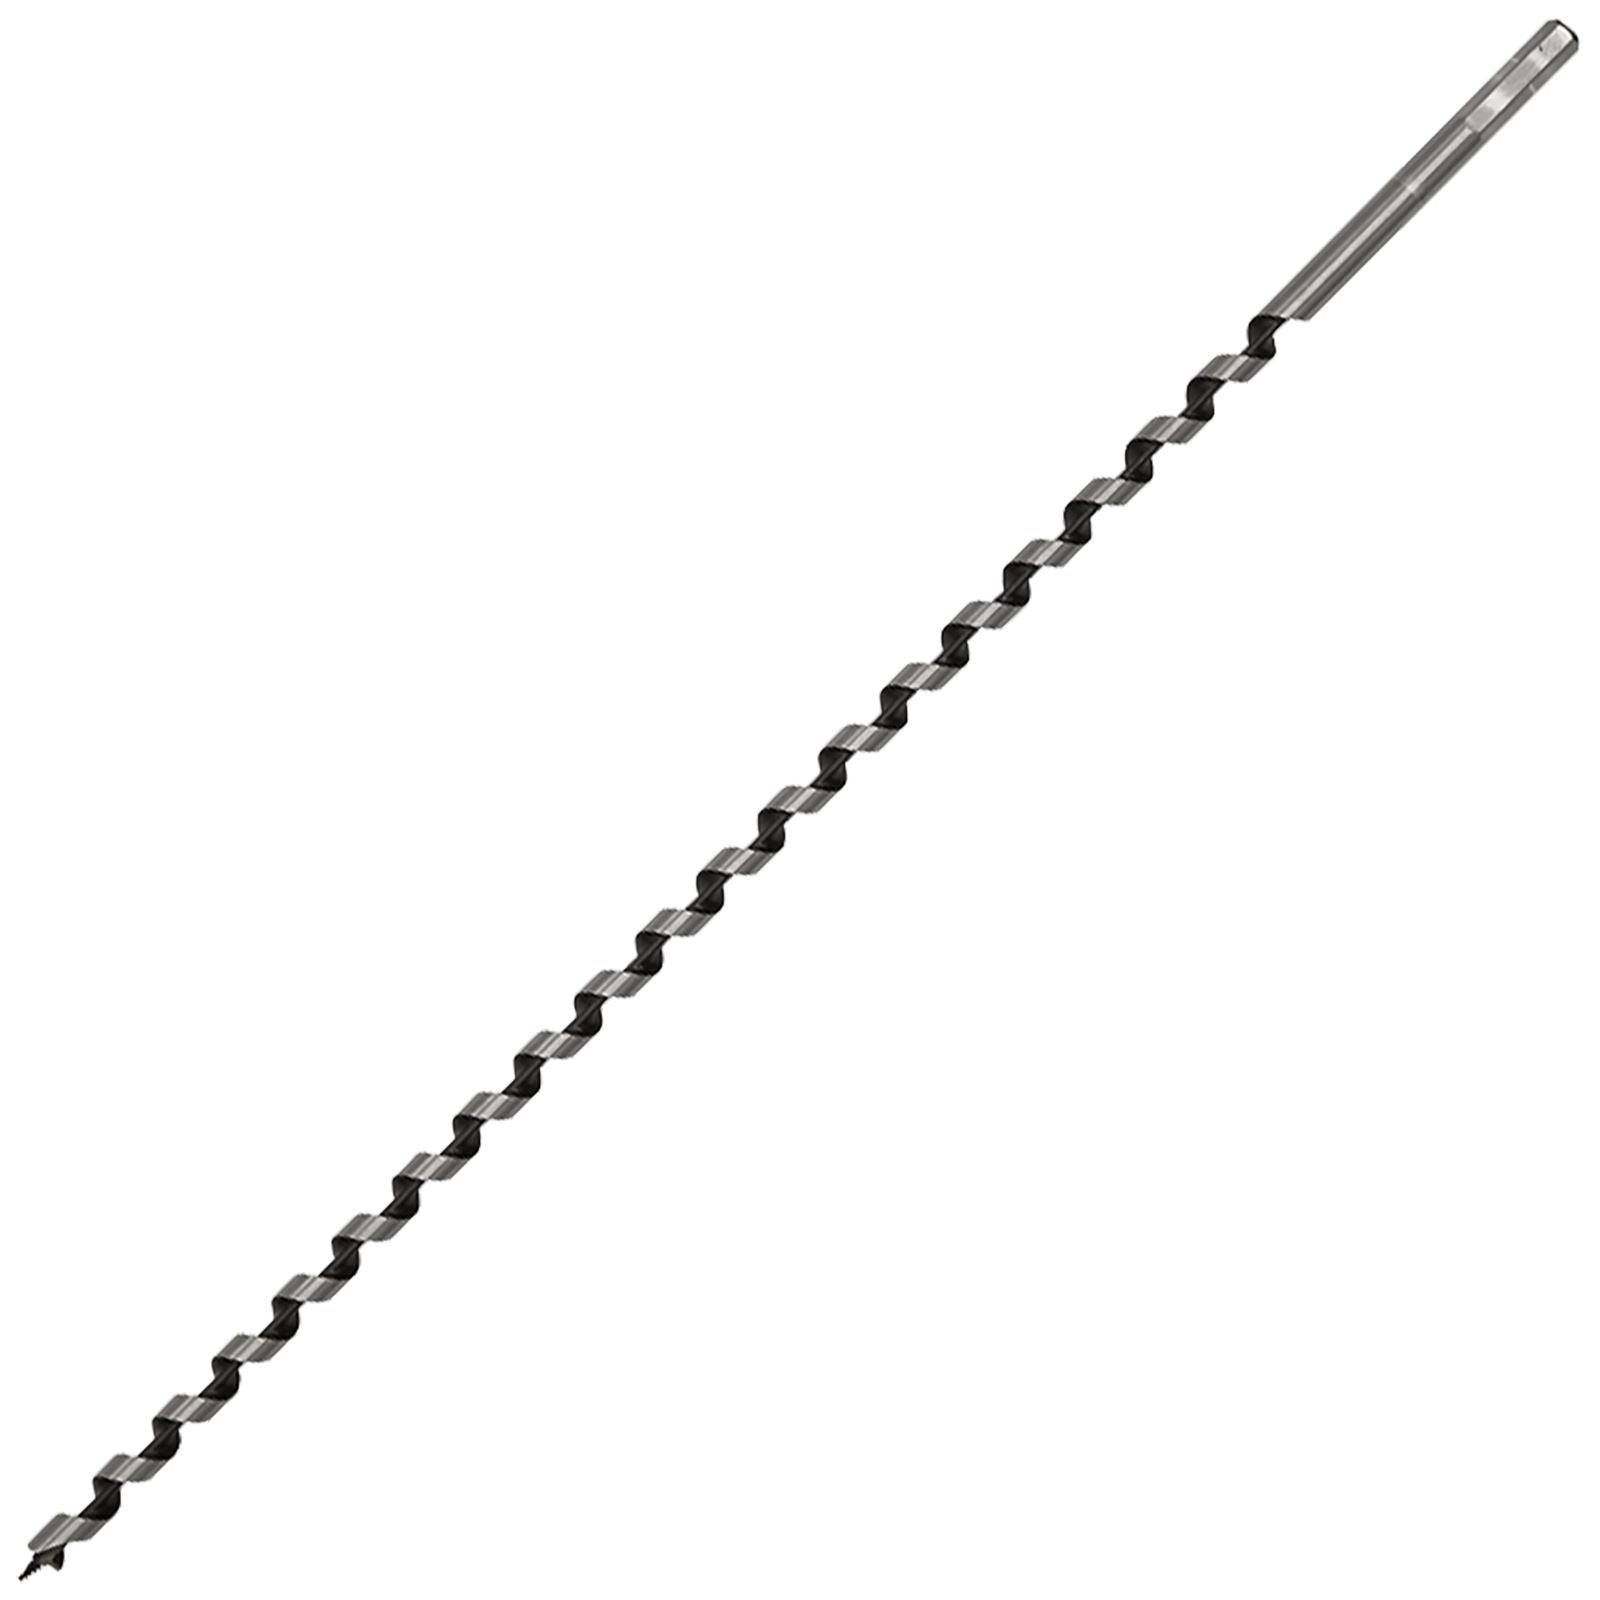 Worksafe by Sealey Auger Wood Drill Bit 12mm x 600mm